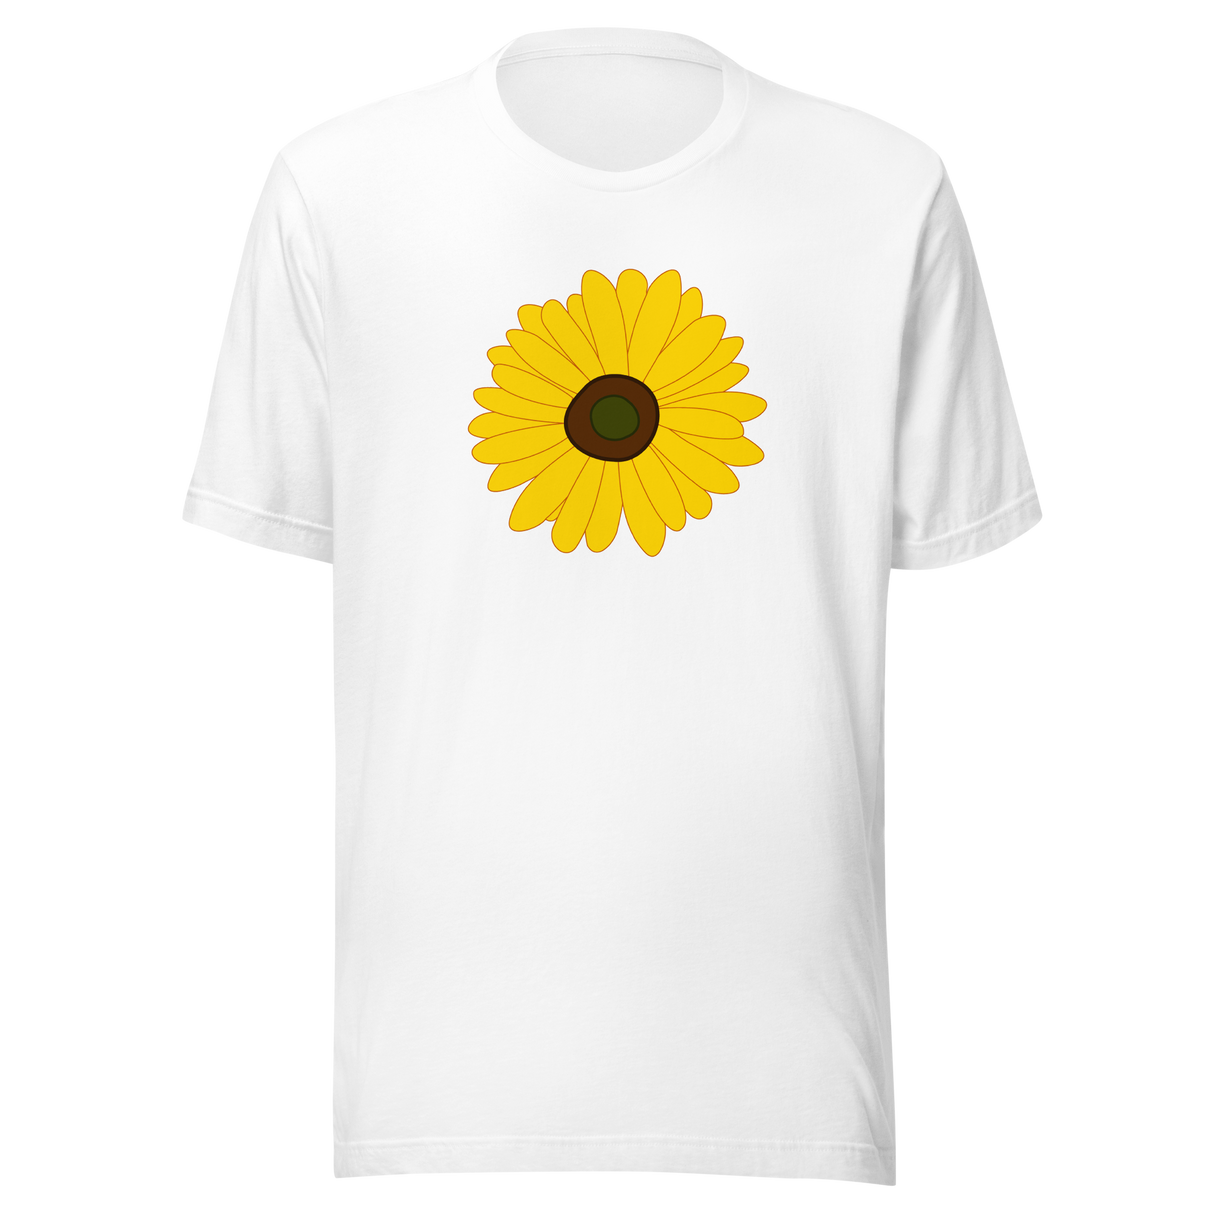 yellow-sunflower-sunflower-tee-yellow-t-shirt-flower-tee-floral-t-shirt-ladies-tee#color_white